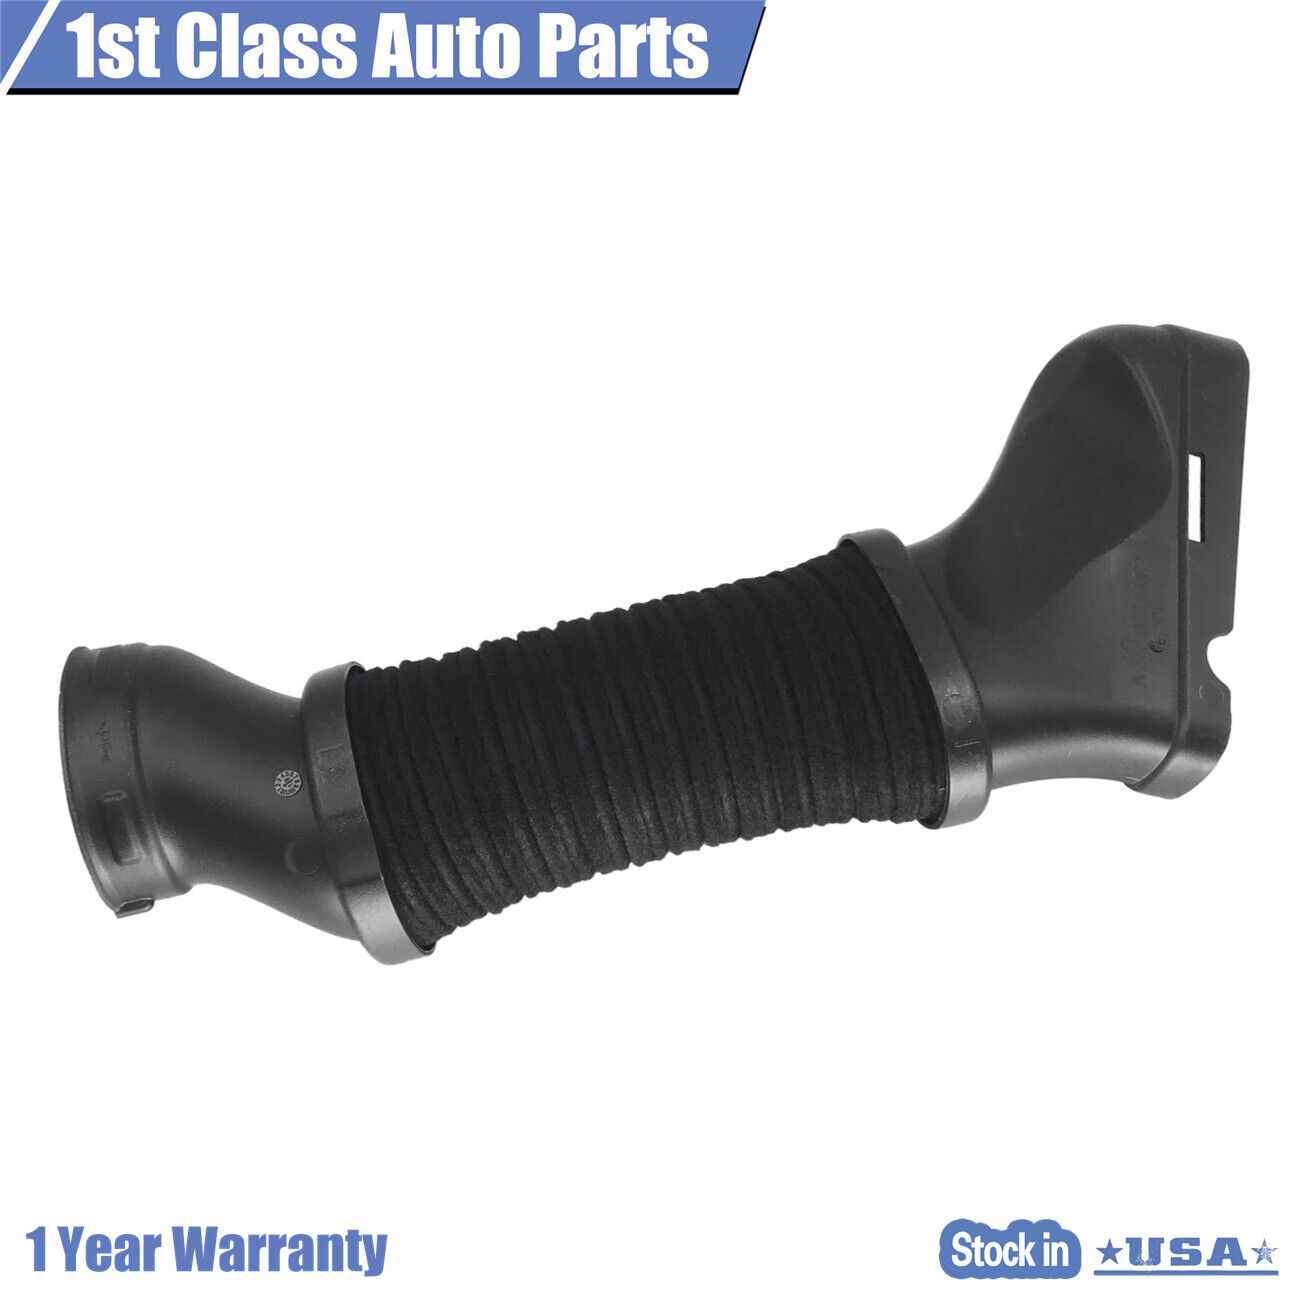 Left Air Cleaner Intake-Inlet Duct Hose For Mercedes-Benz E550 CLS550 E63 AMG